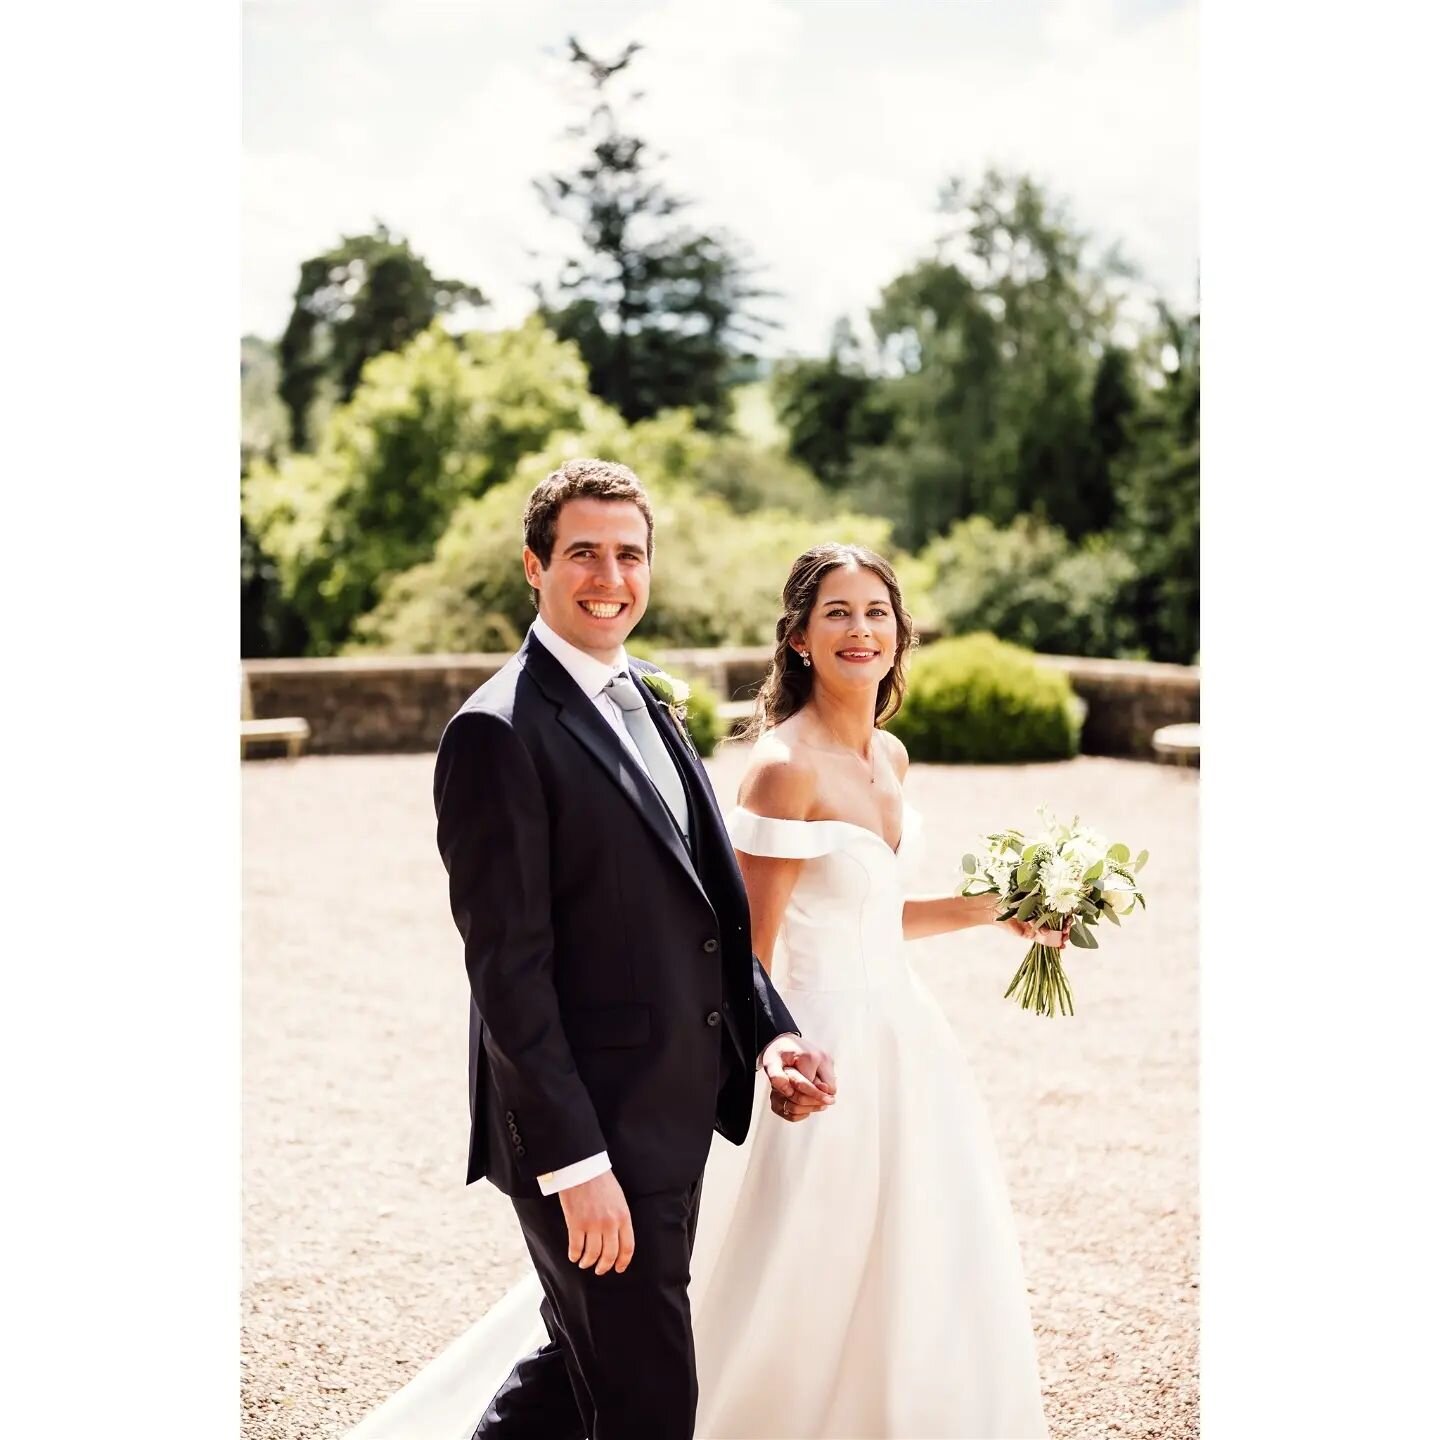 Throwback to this beautiful pair, Kez + Howell huntshamcourt
.
.
.
.
.
.
.
.
#huntshamcourt #huntshamcourtwedding #devonweddingphotography #devonweddingphotographer #devonweddings #devonweddingvenue #ukweddingphotographers #ukweddingphotography #docu